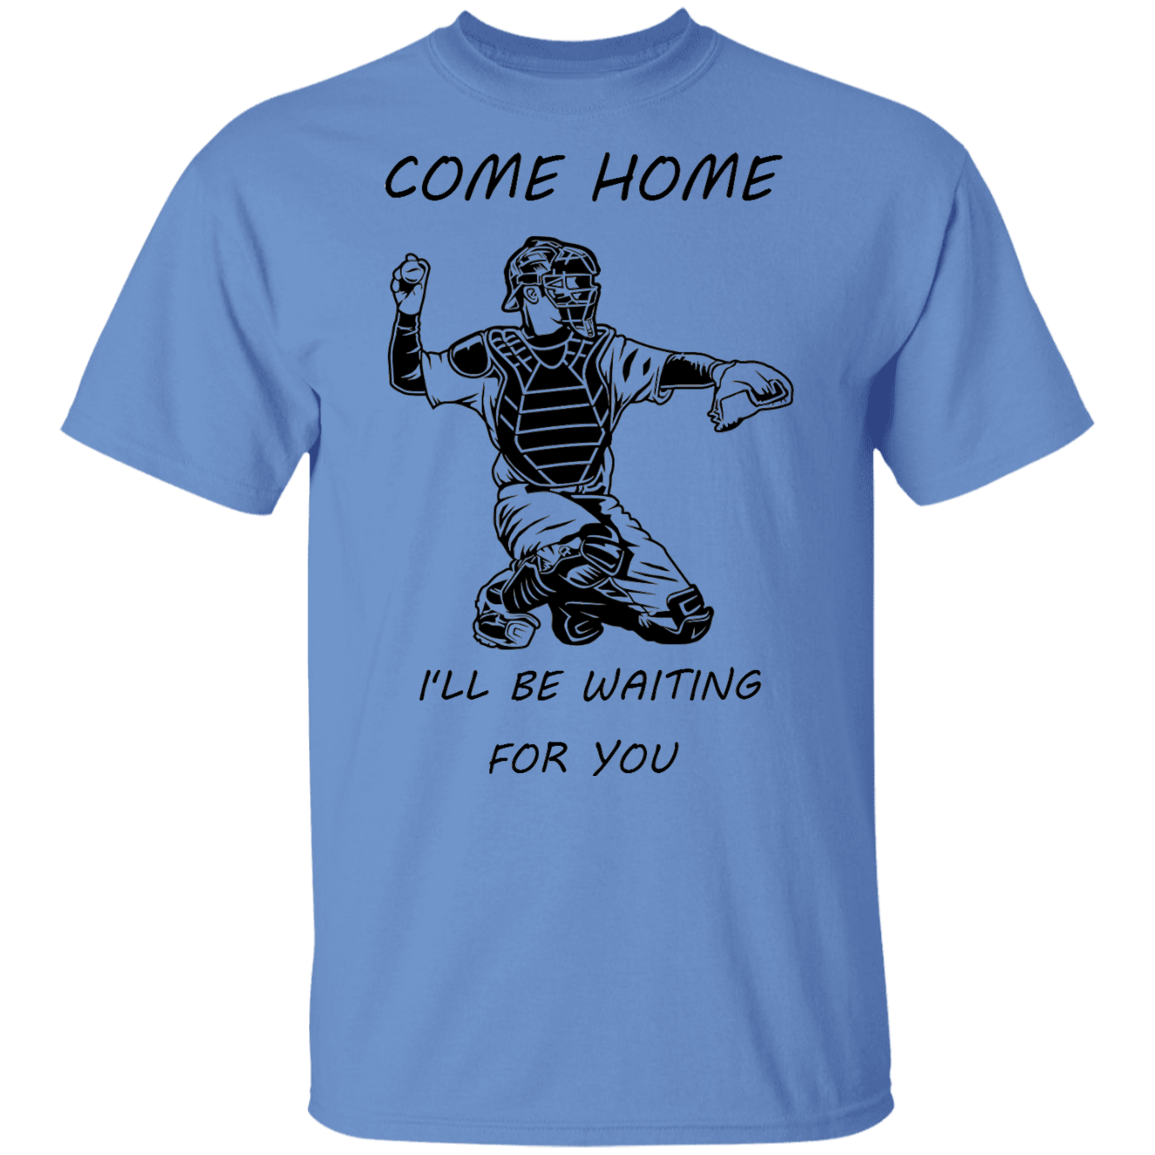 Baseball Catcher - come home T-Shirt (youth)